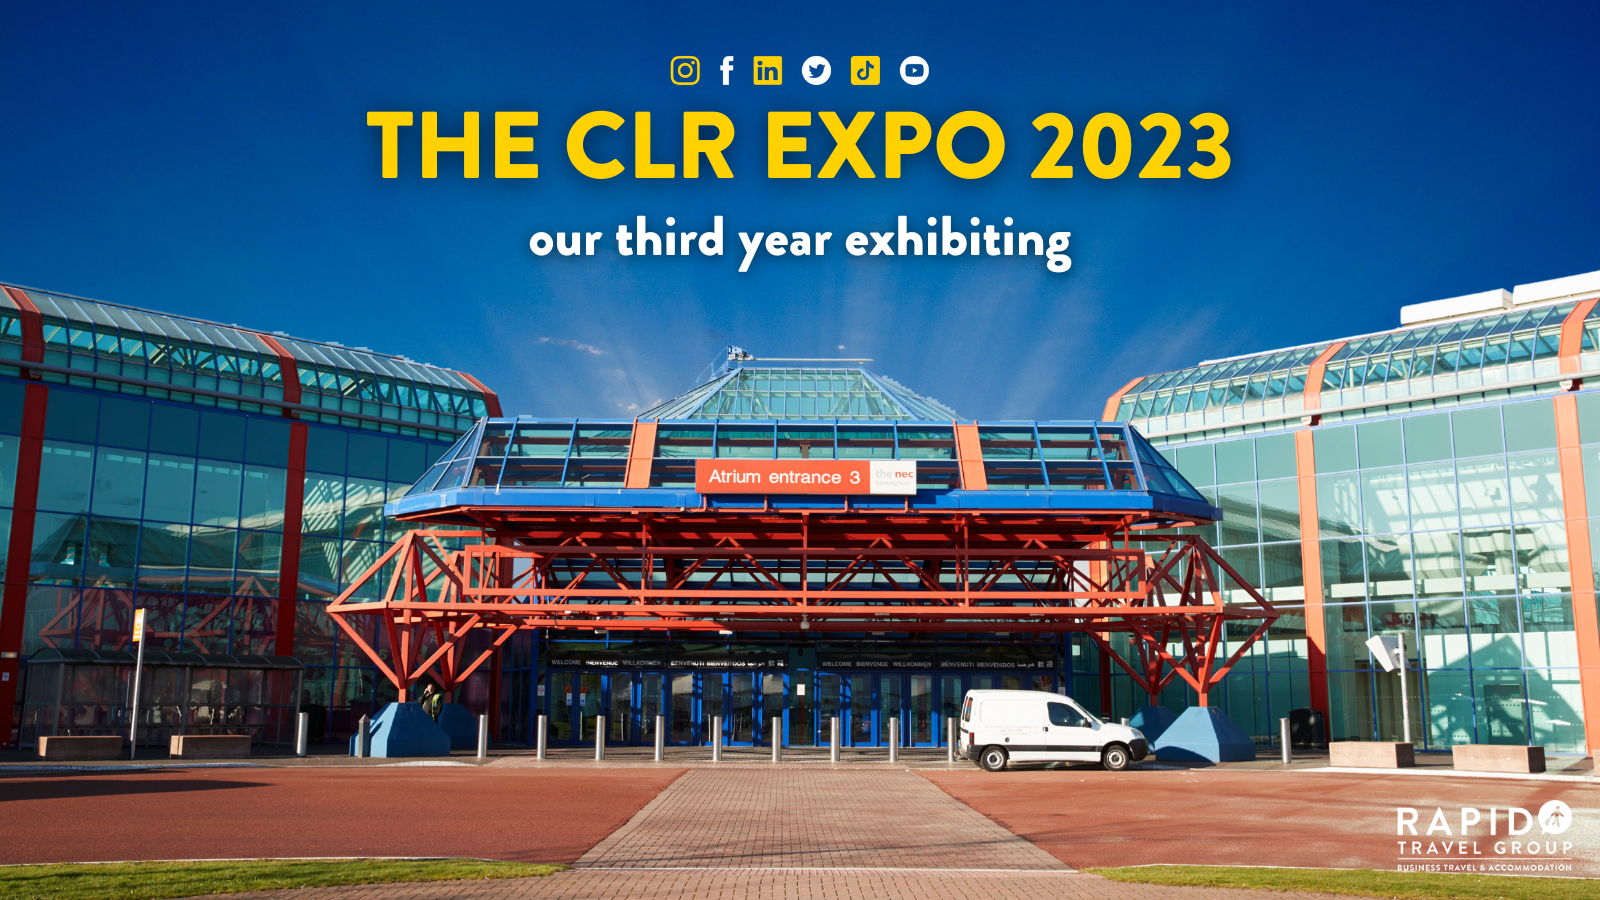 The CLR Expo 2023: Our Third Year Exhibiting